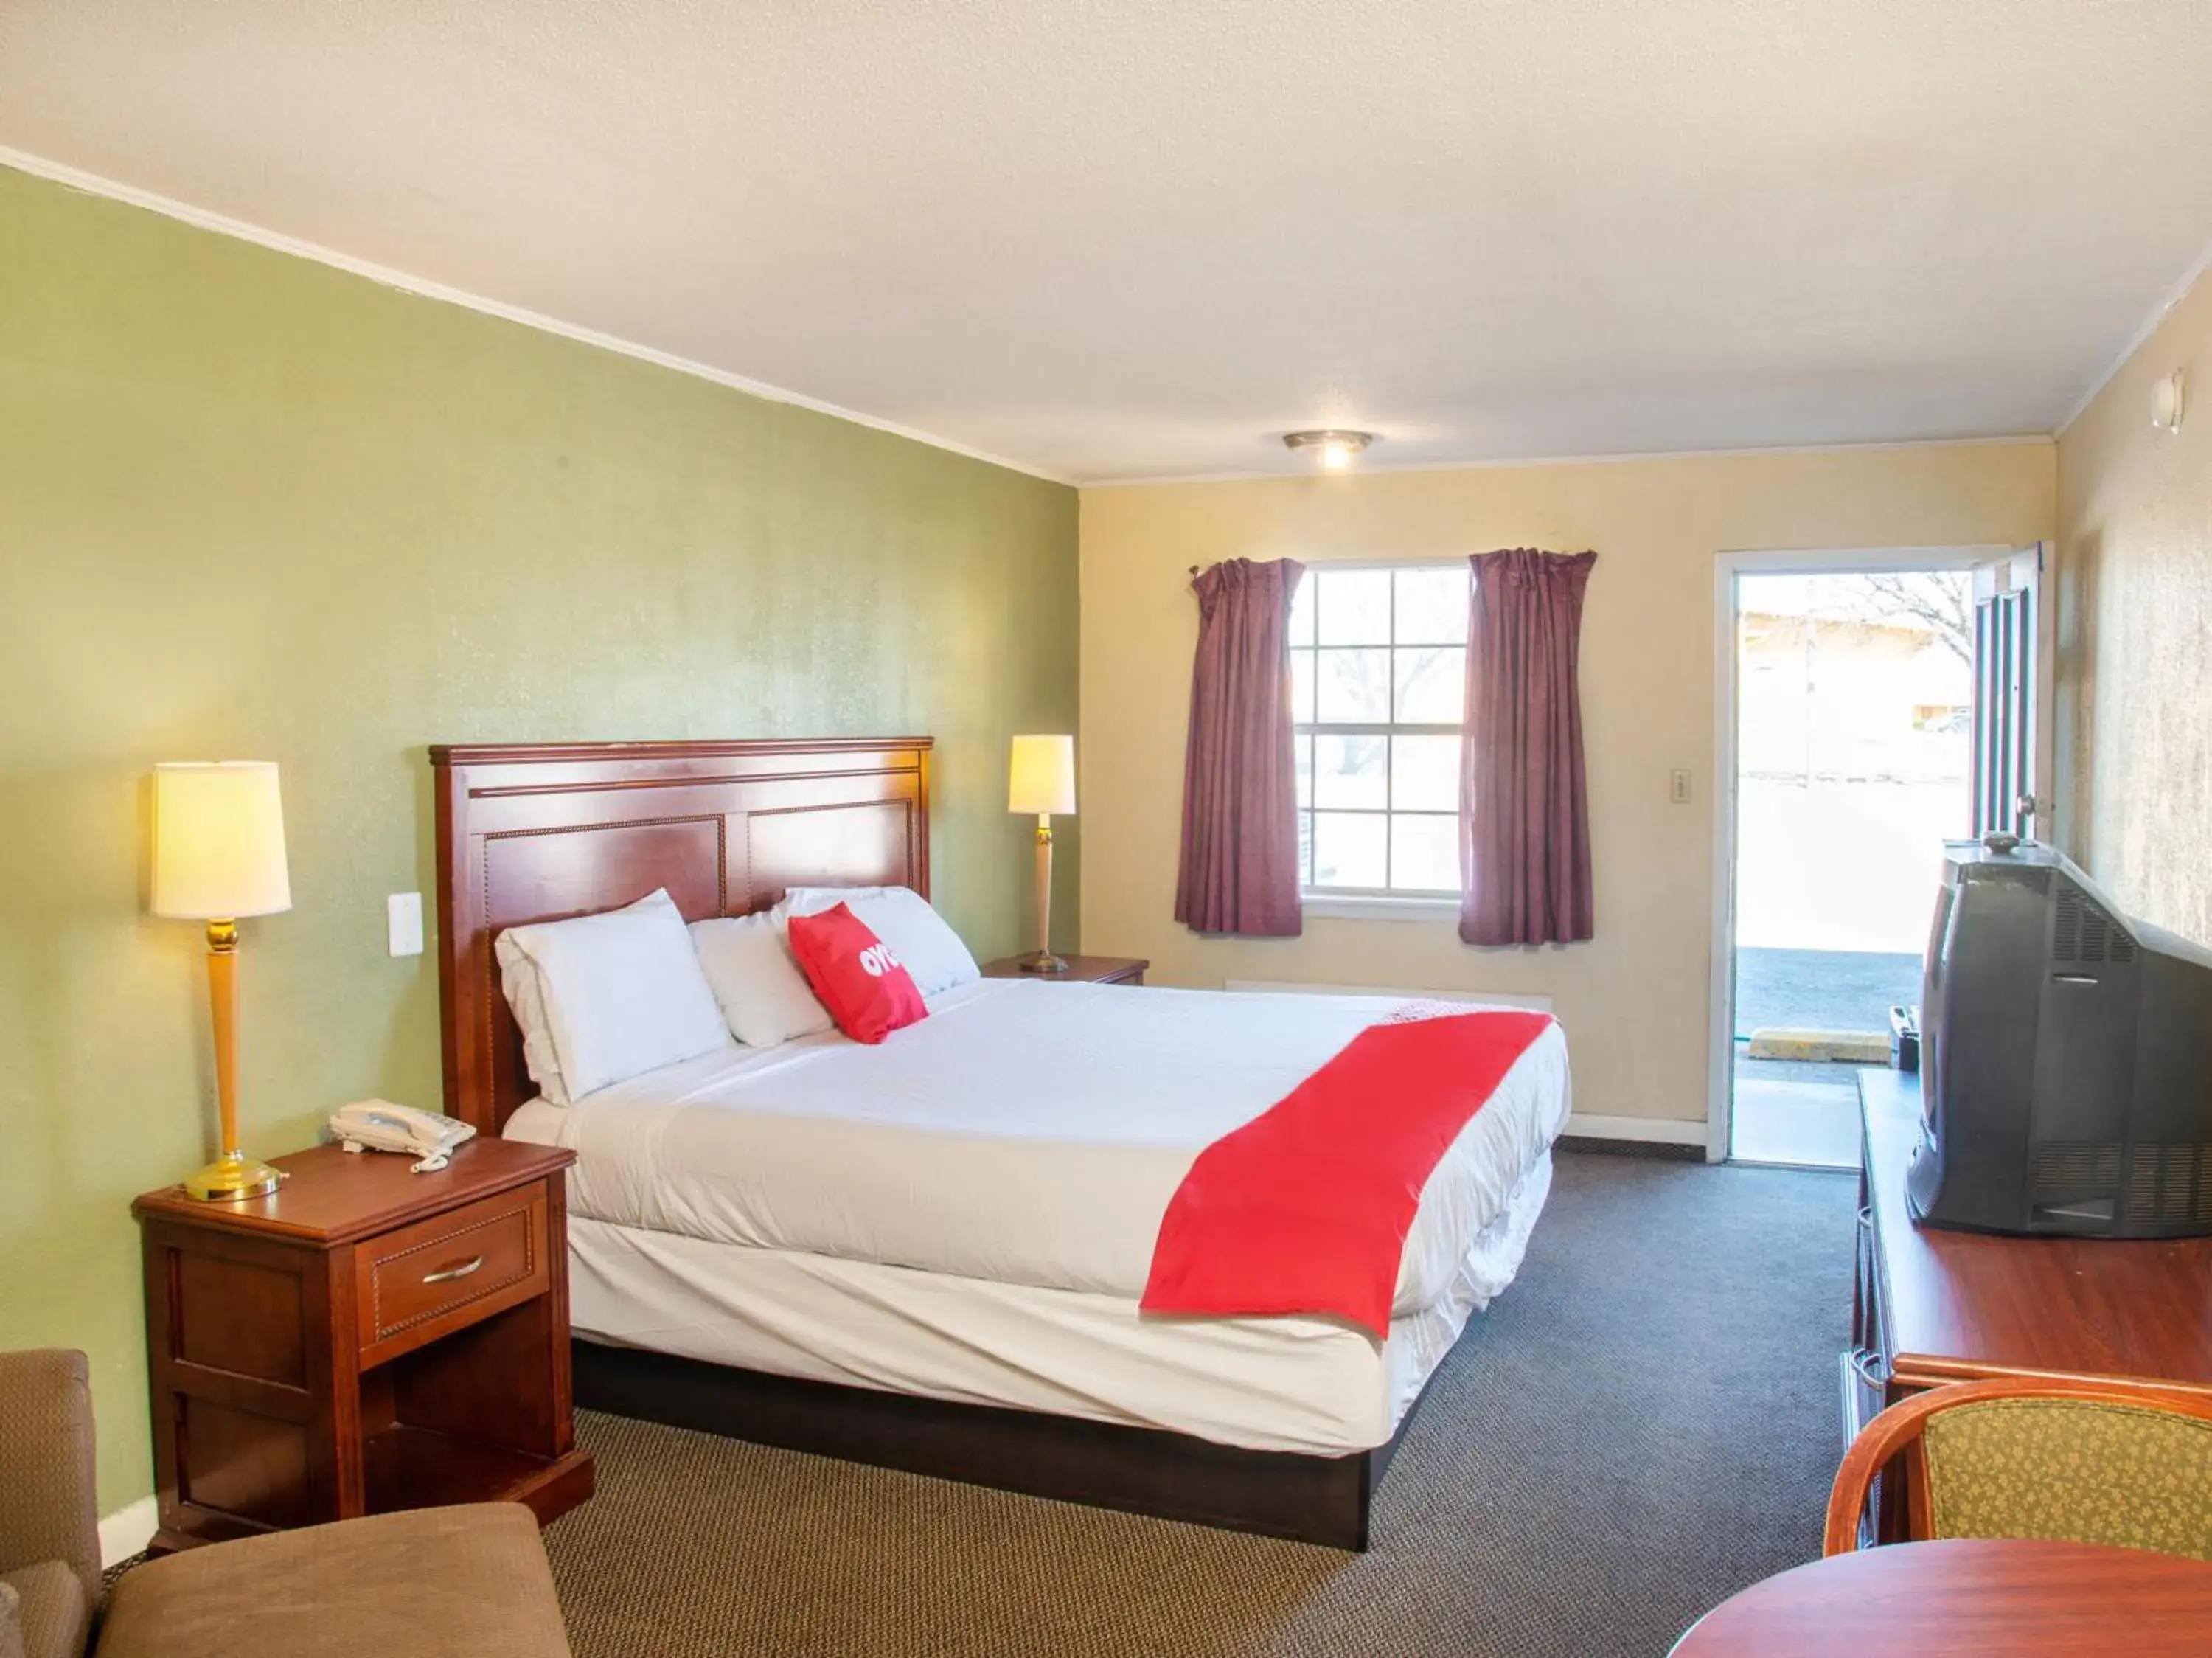 Bedroom in Rest Inn - Extended Stay, I-40 Airport, Wedding & Event Center